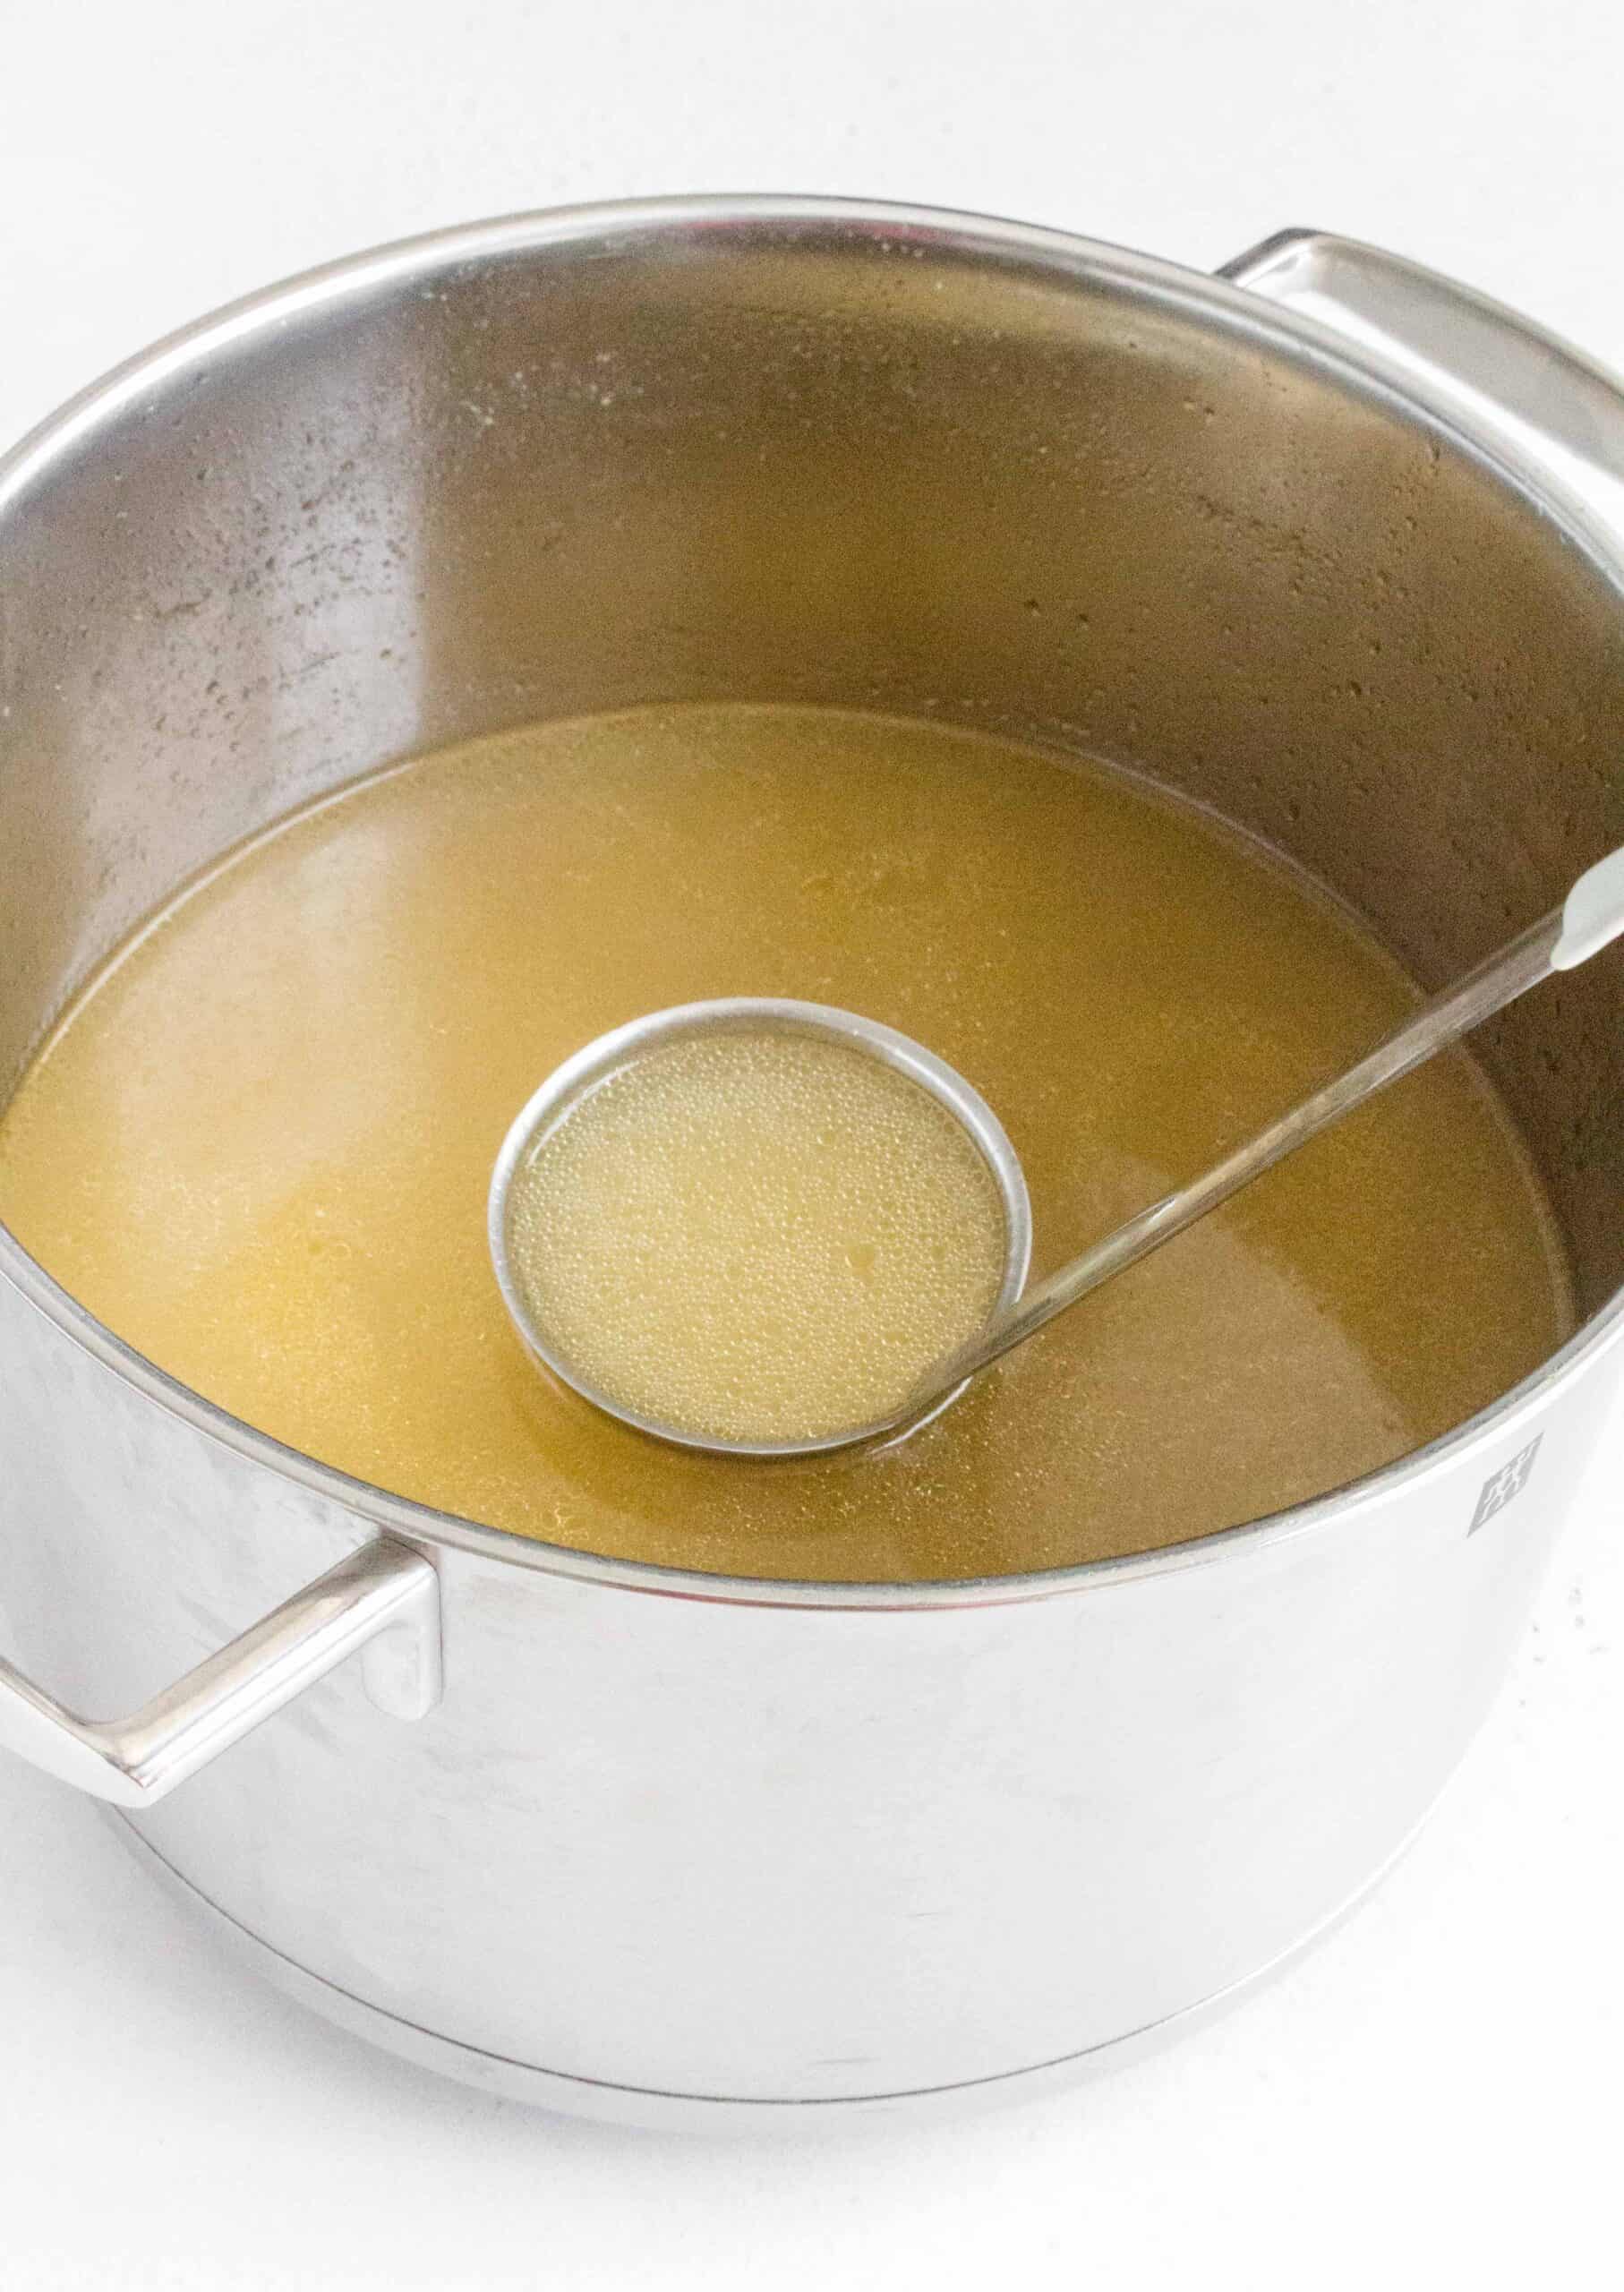 chicken broth in 6qt stock pot with ladle inside.